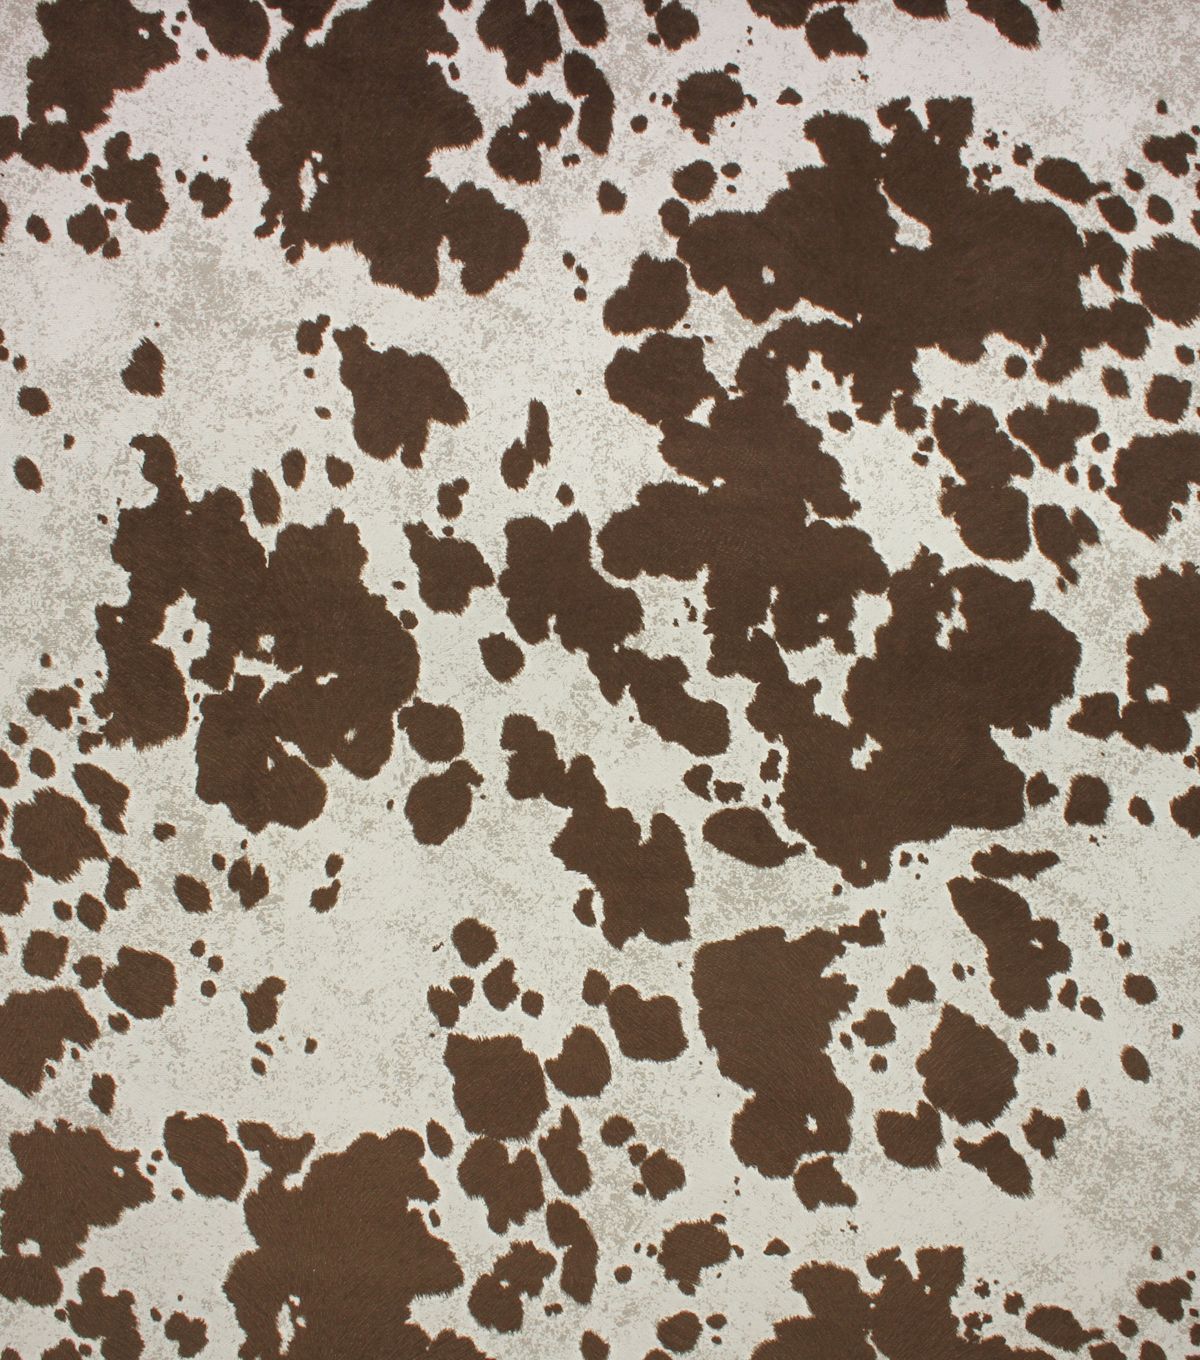 Realistic Cowhide Print Seamless Background  drypdesigns